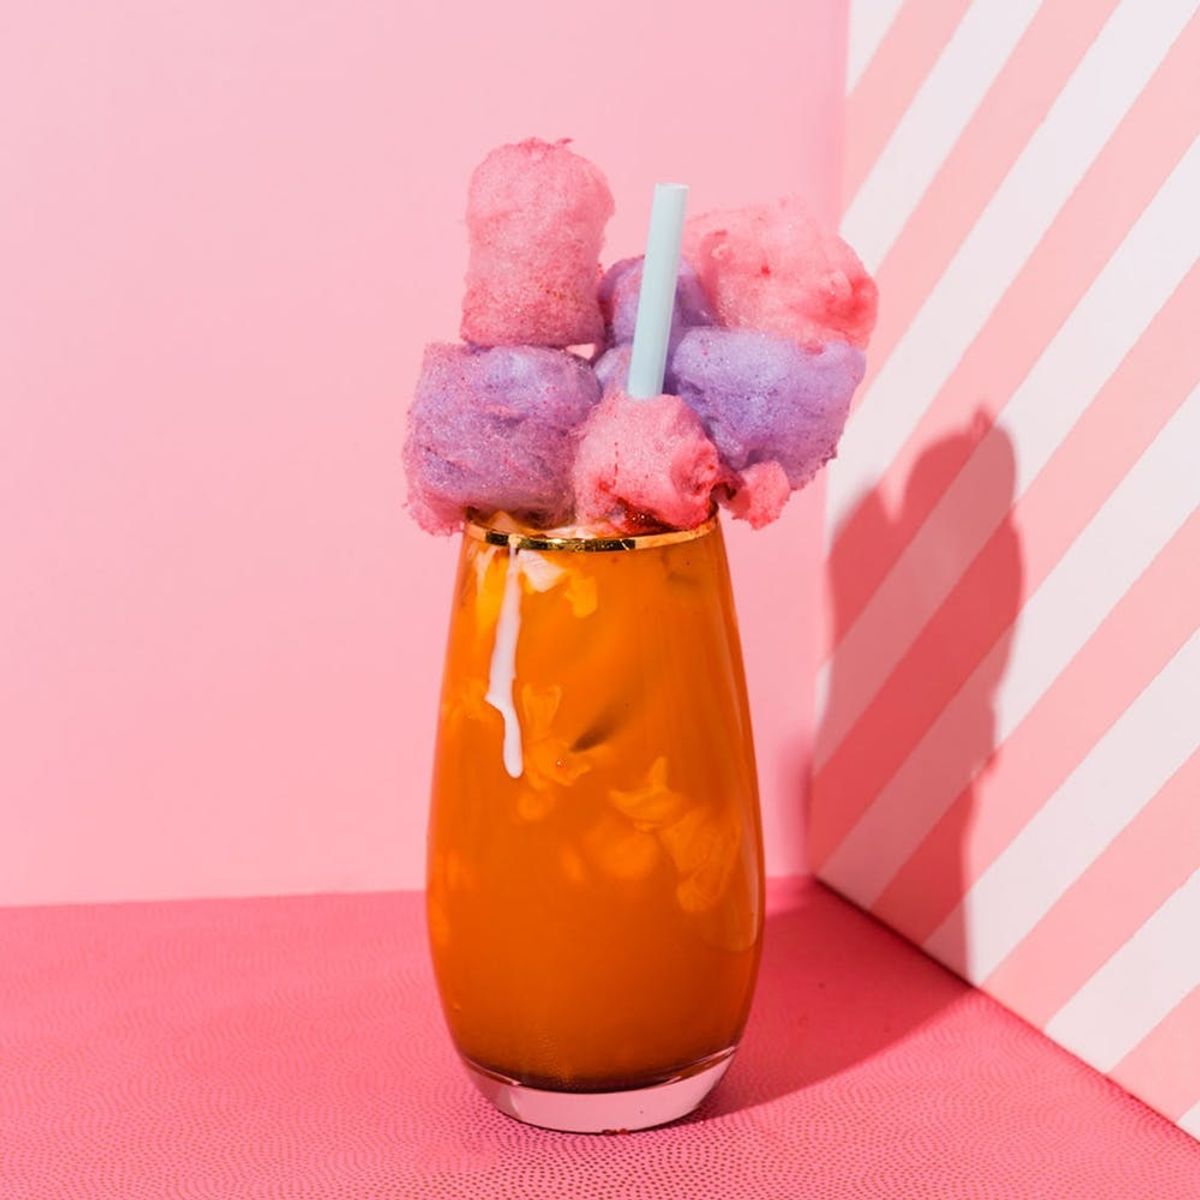 Dress Up Your Thai Iced Tea With a Cotton Candy Crown